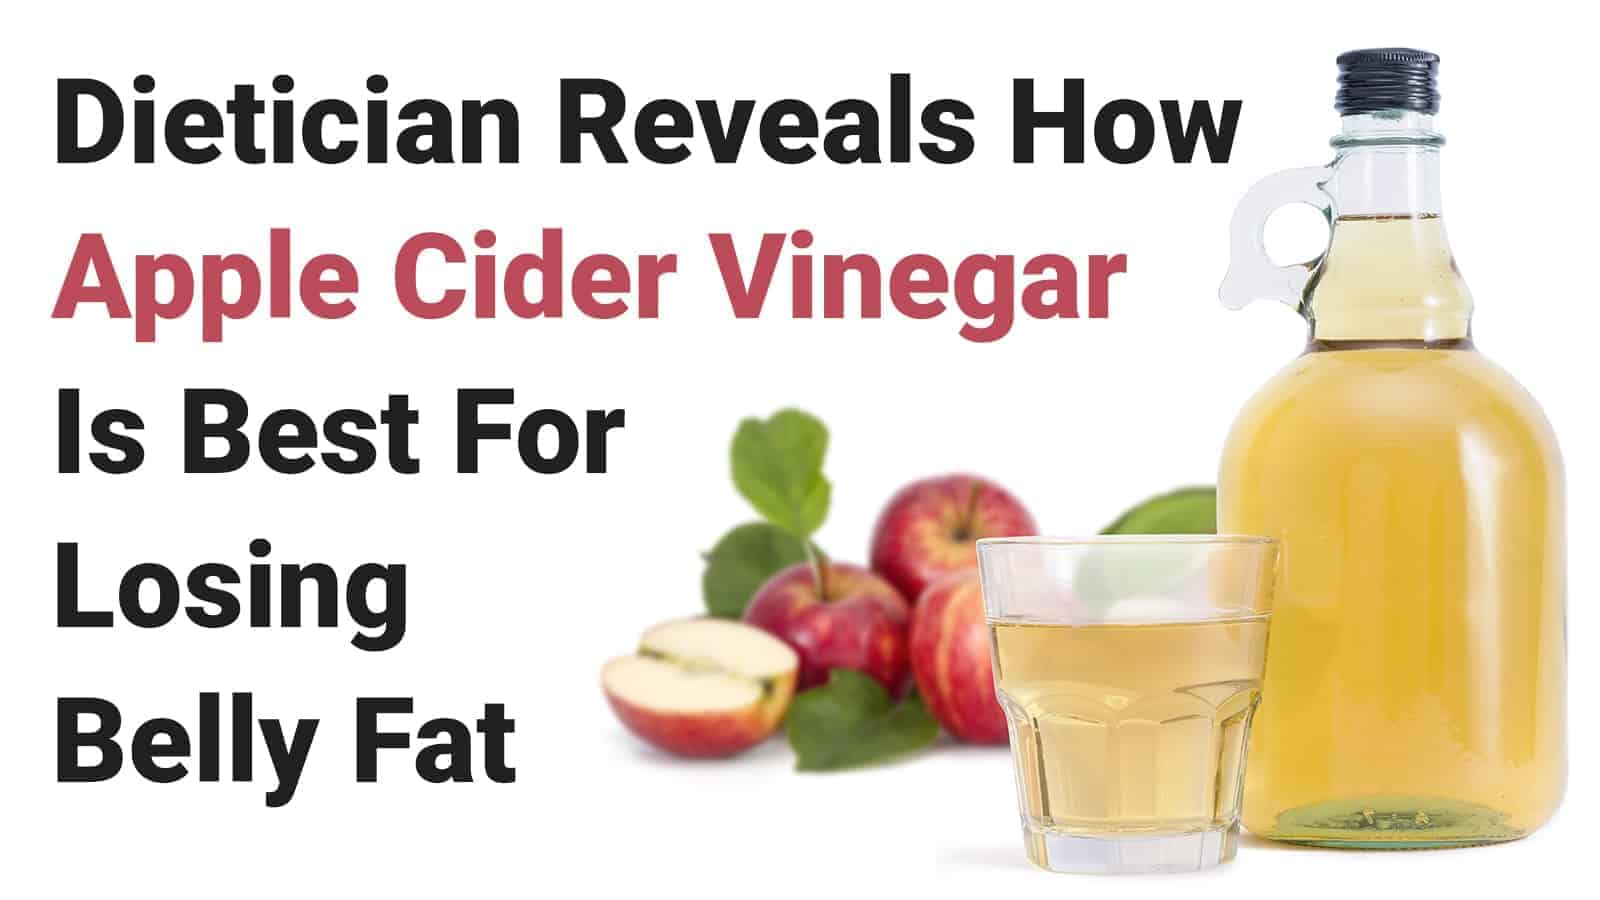 Dietician Reveals How Apple Cider Vinegar Is Best For Losing Belly Fat